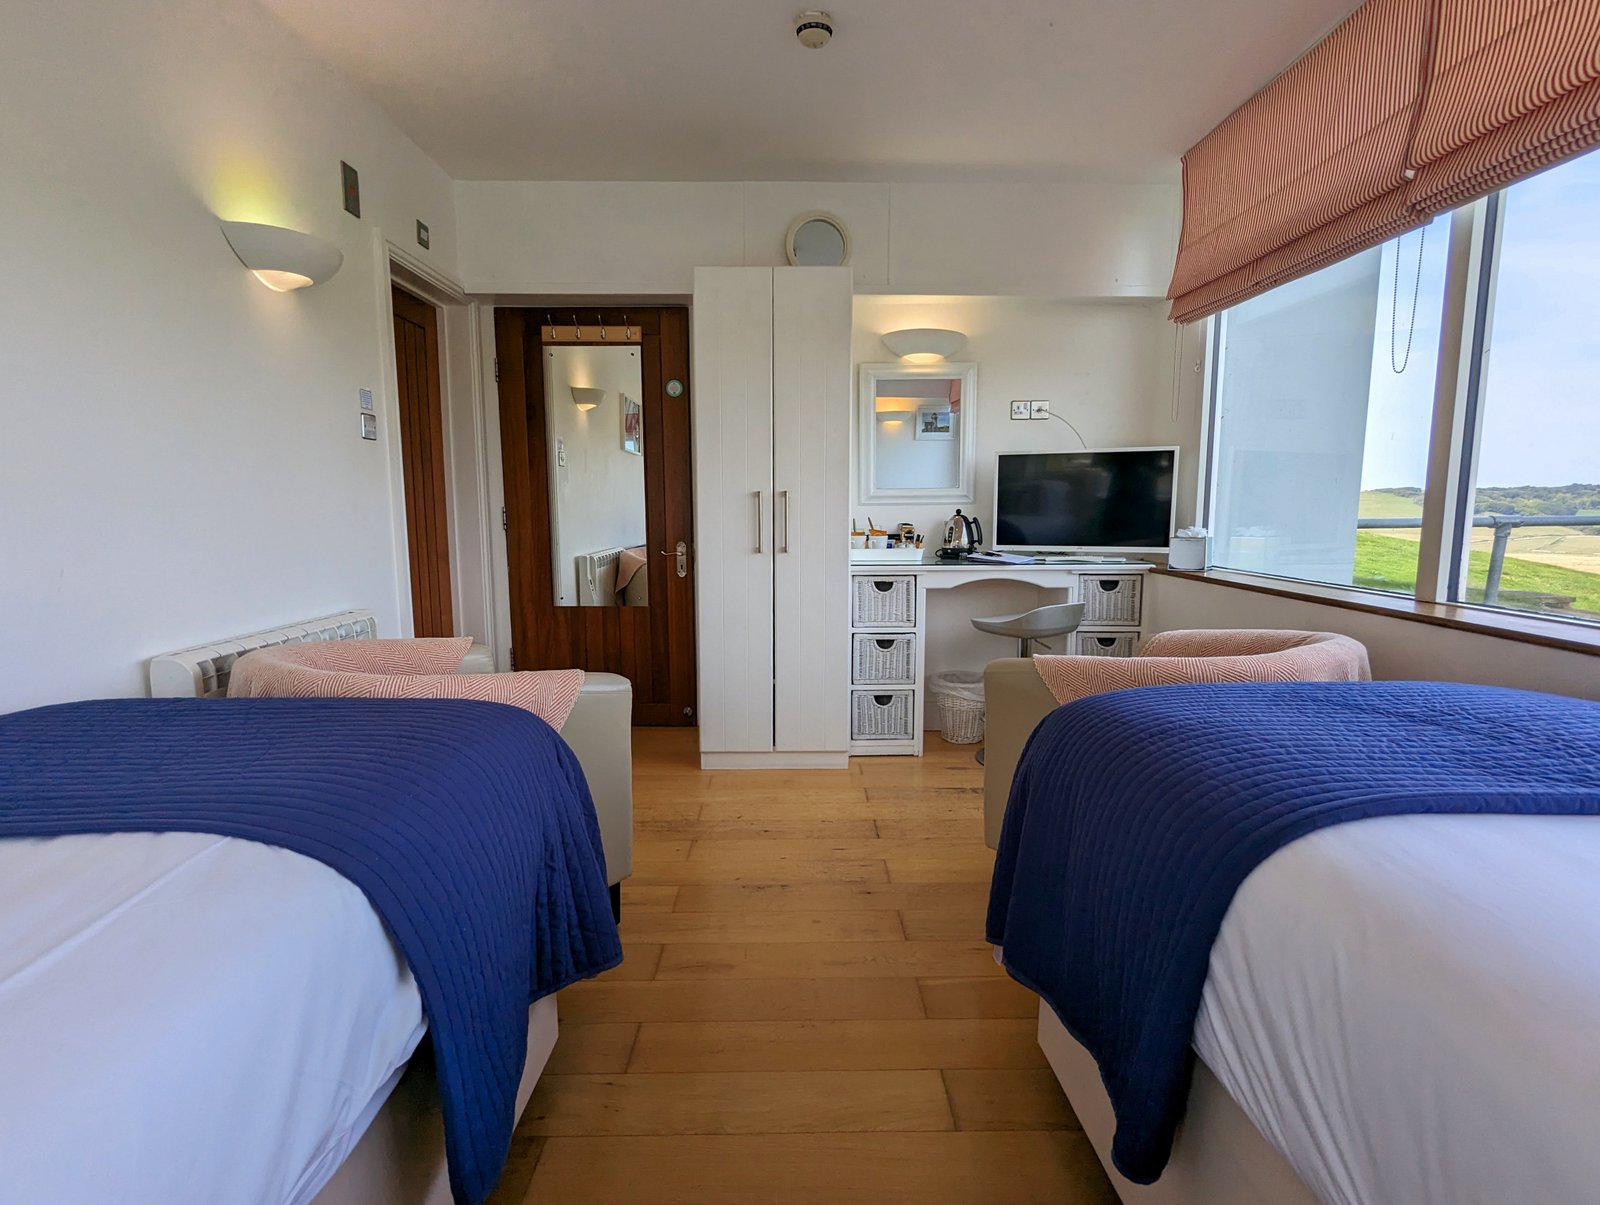 Bed and Breakfast Twin Room at Beachy Head